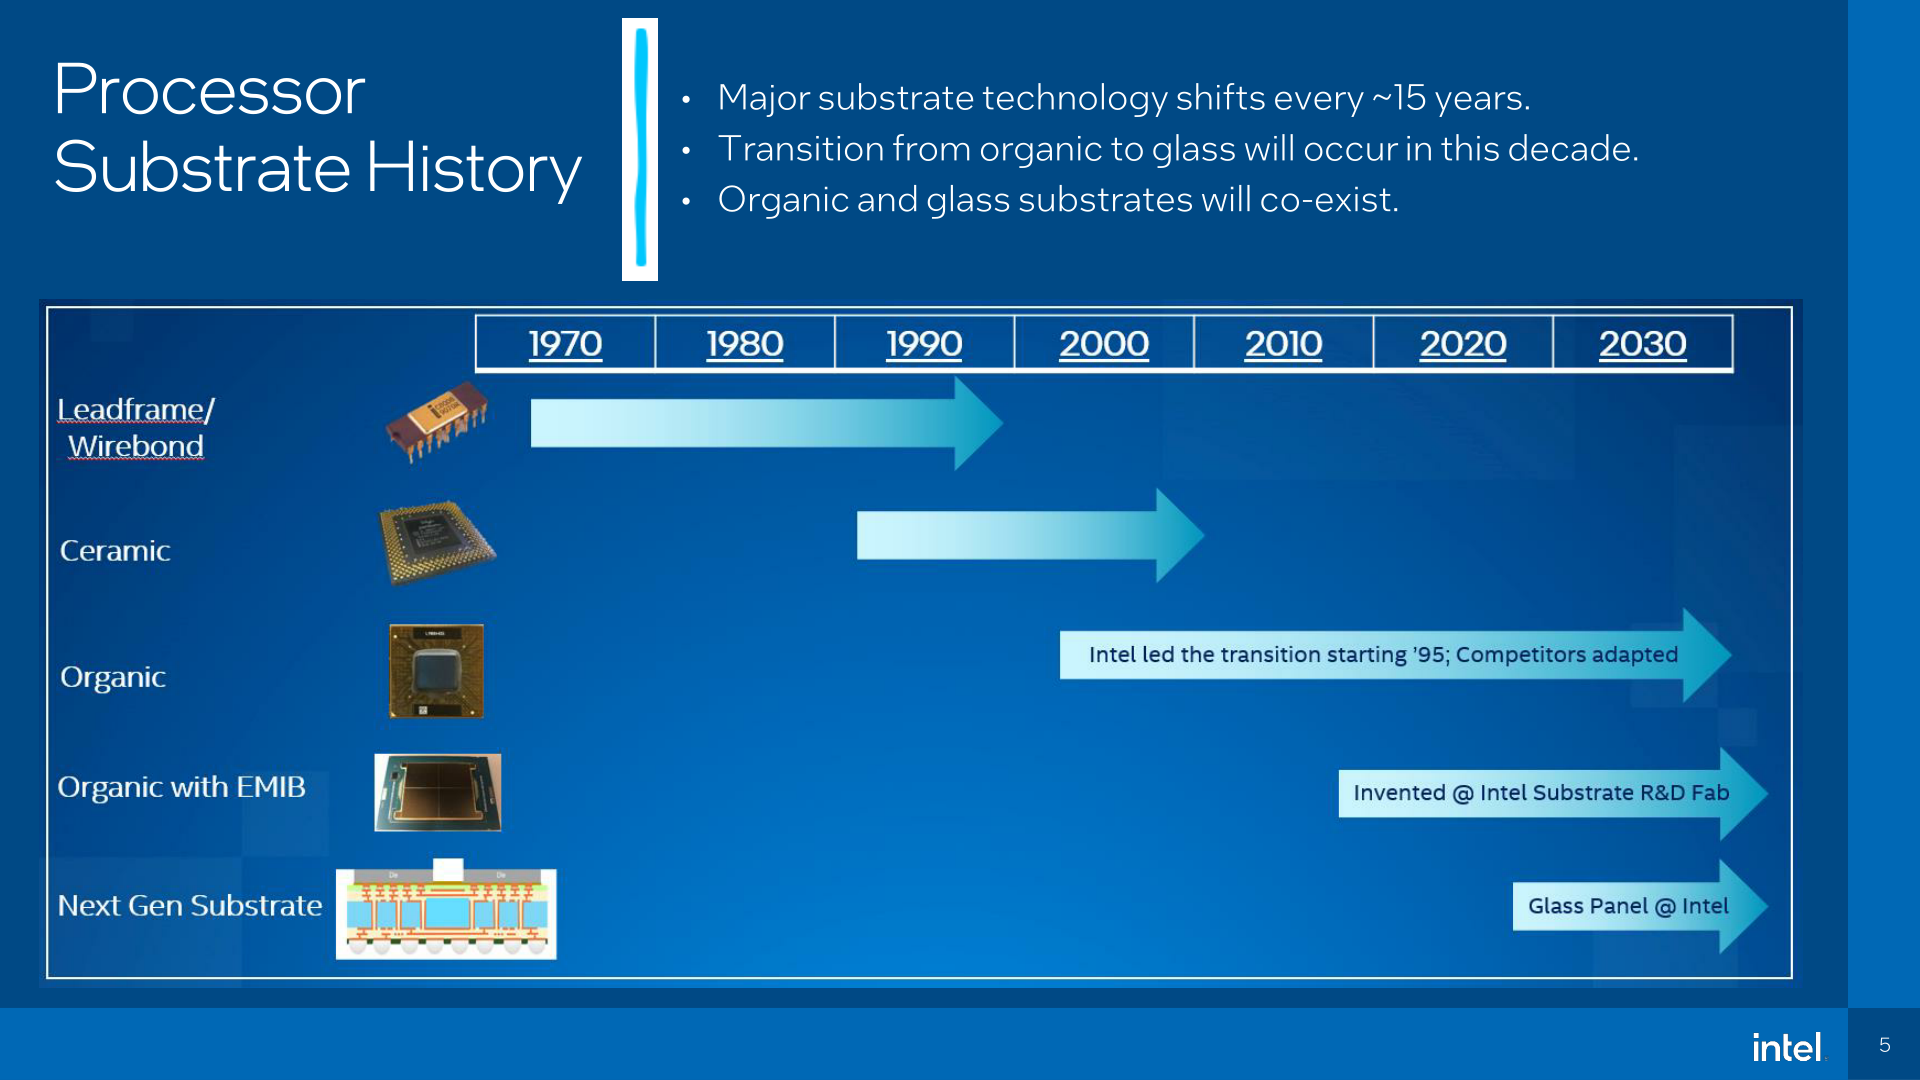 Intel Shows Off Work on Next-Gen Glass Core Substrates, Plans Deployment Later in Decade